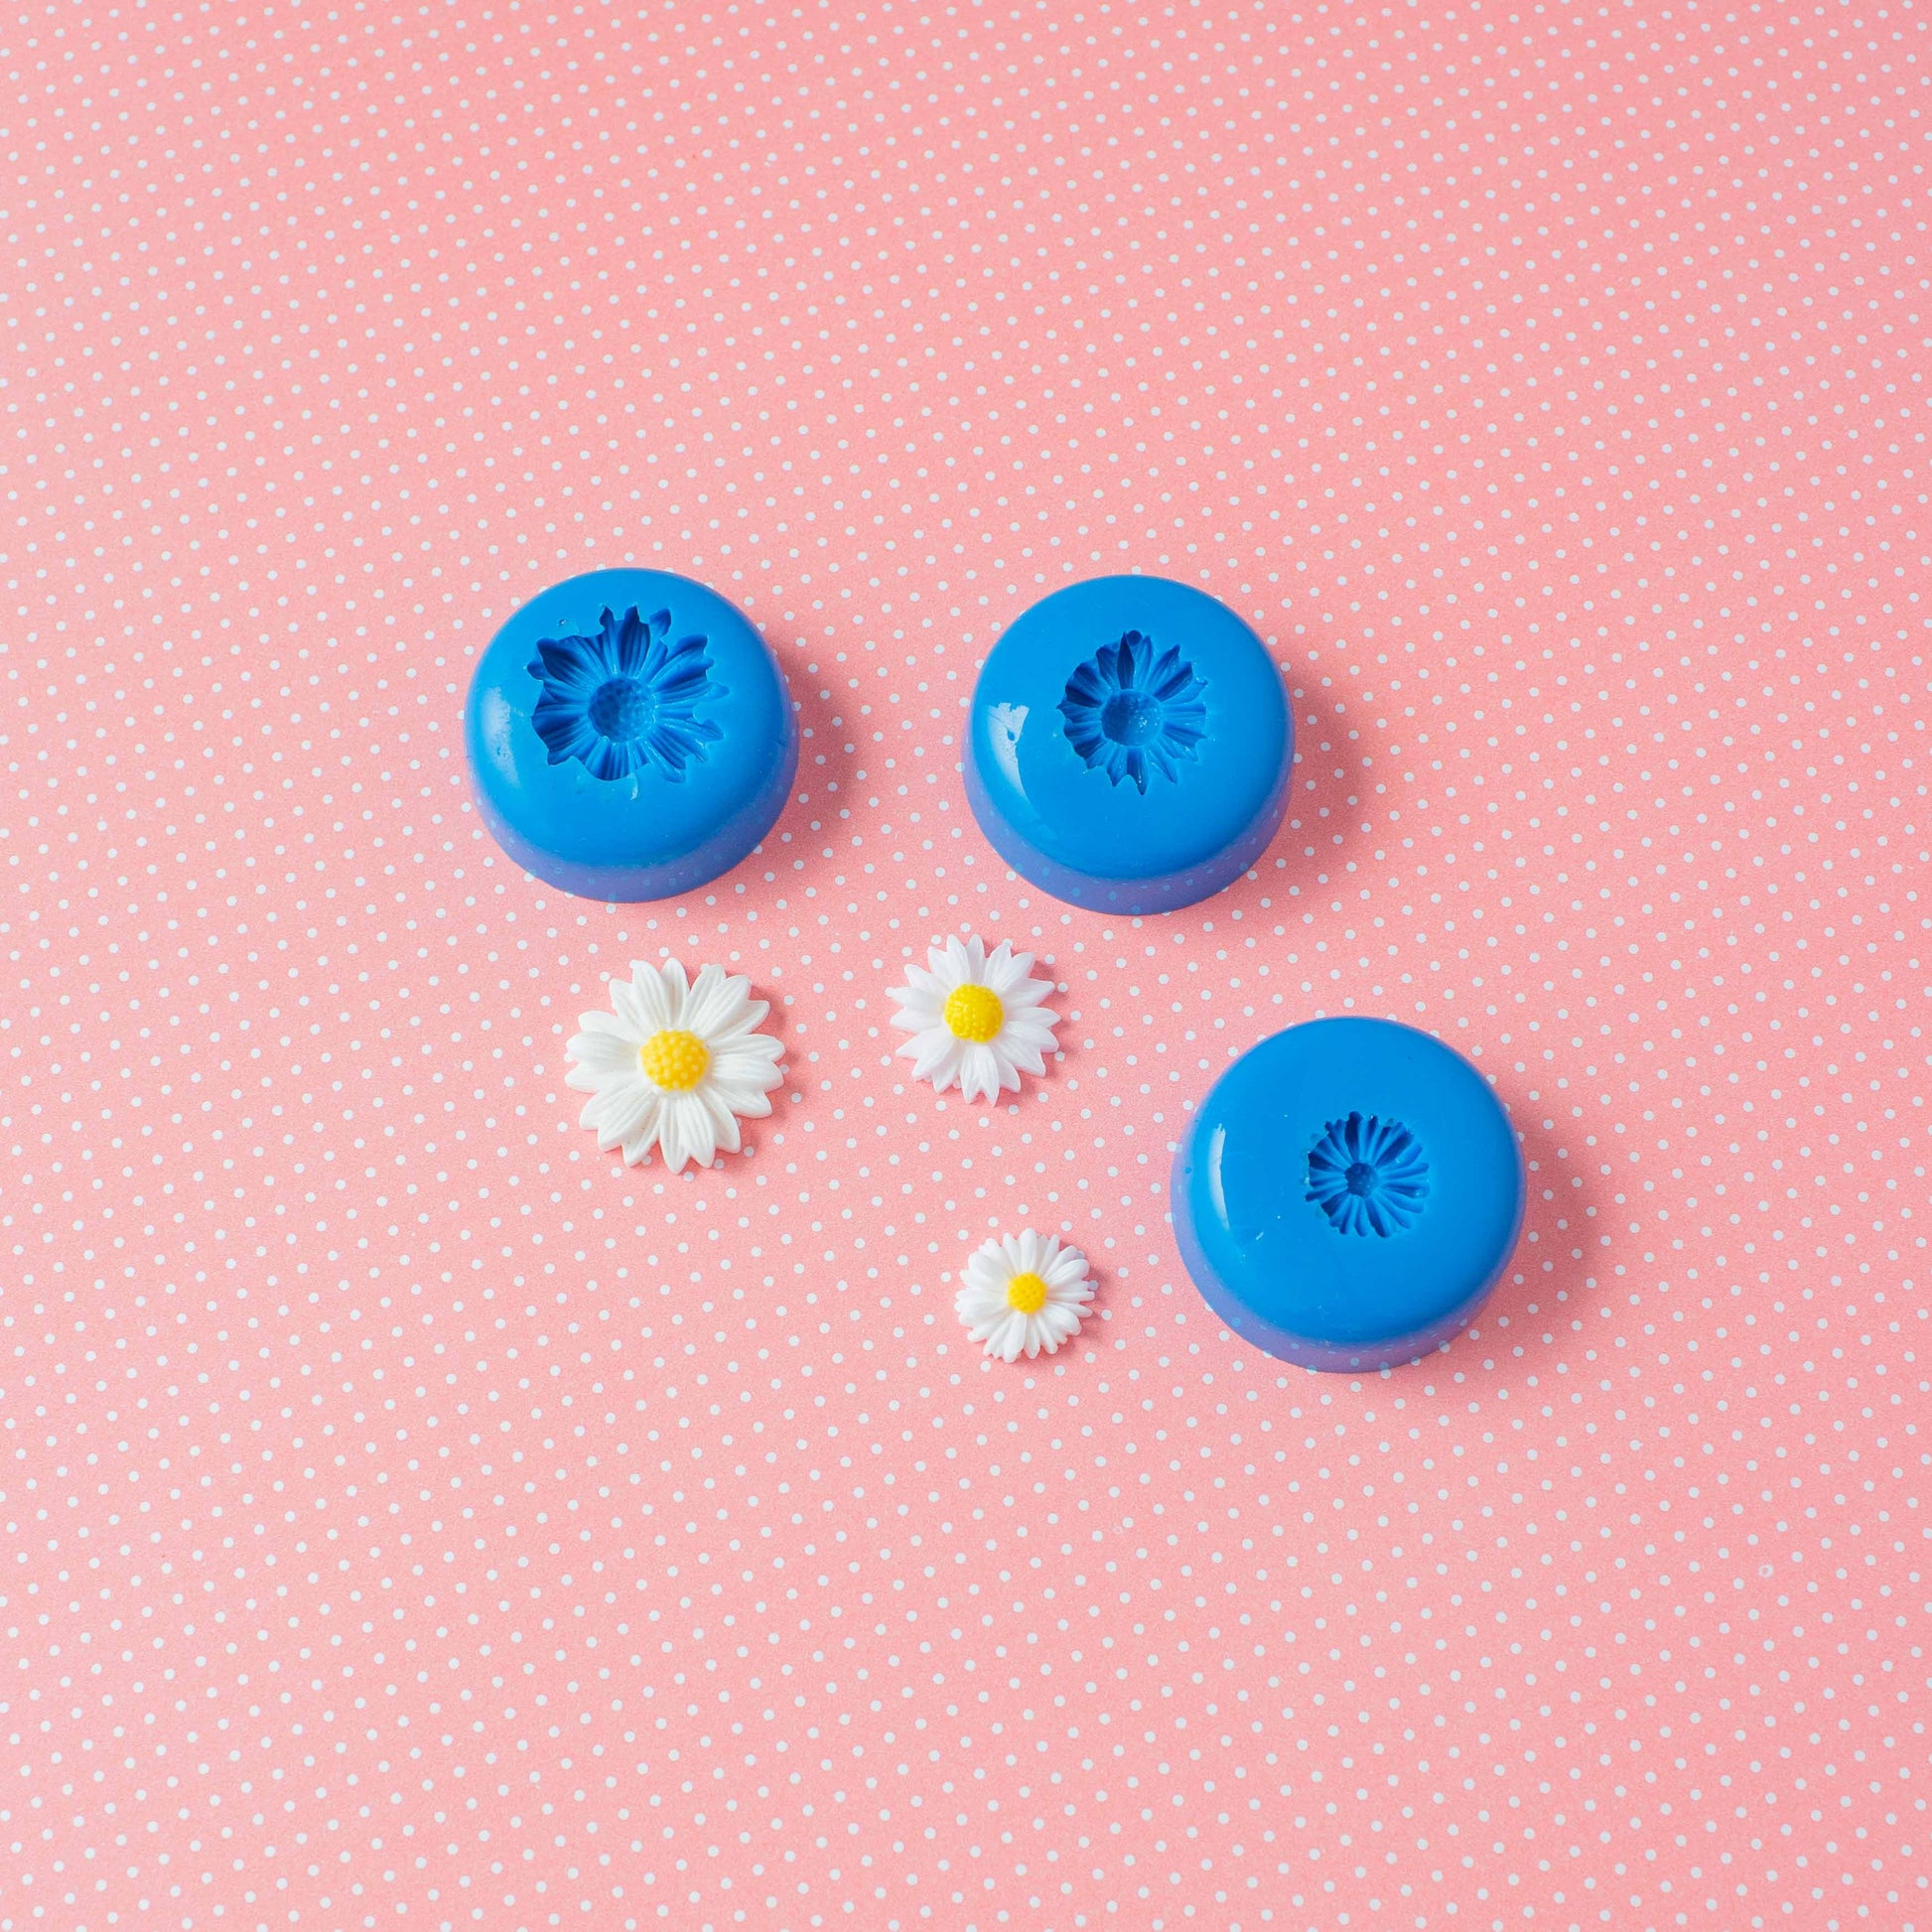 A set of 3 flower silicone molds and three daizies in a pink polka dots background.